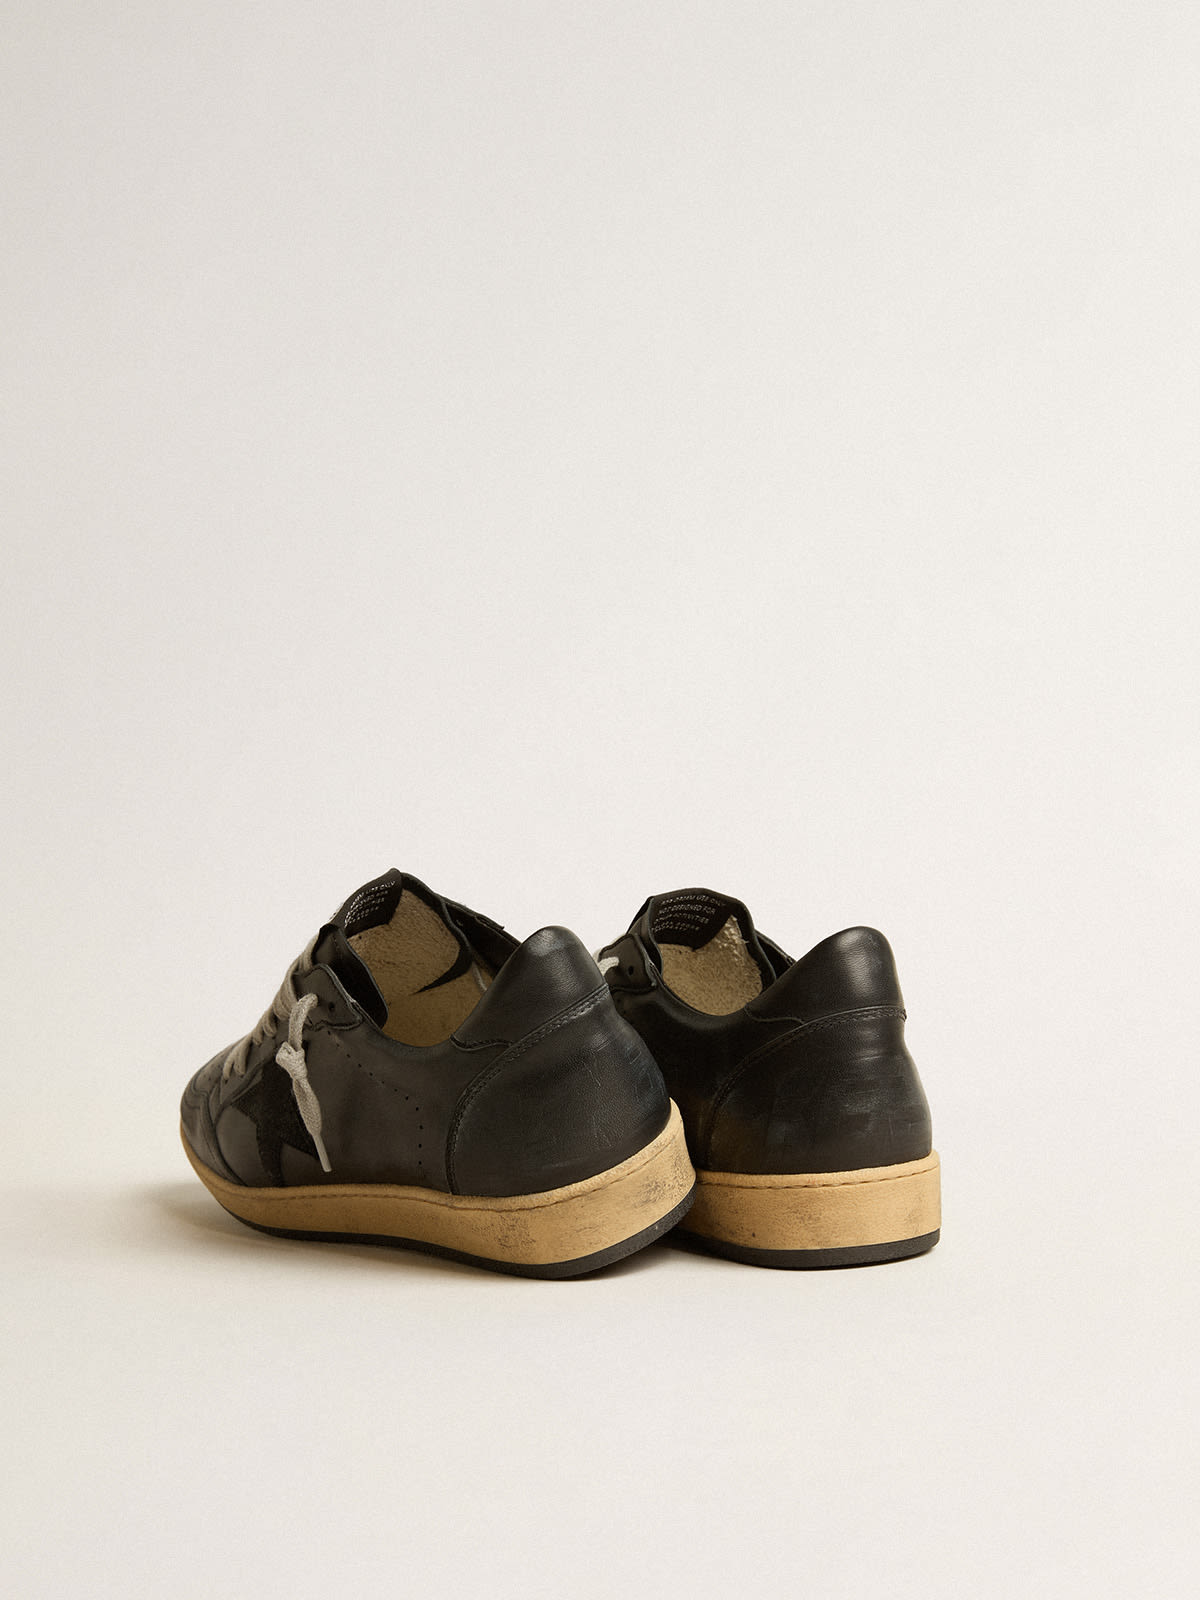 Golden Goose - Ball Star in black nappa with suede star and black nappa heel tab in 